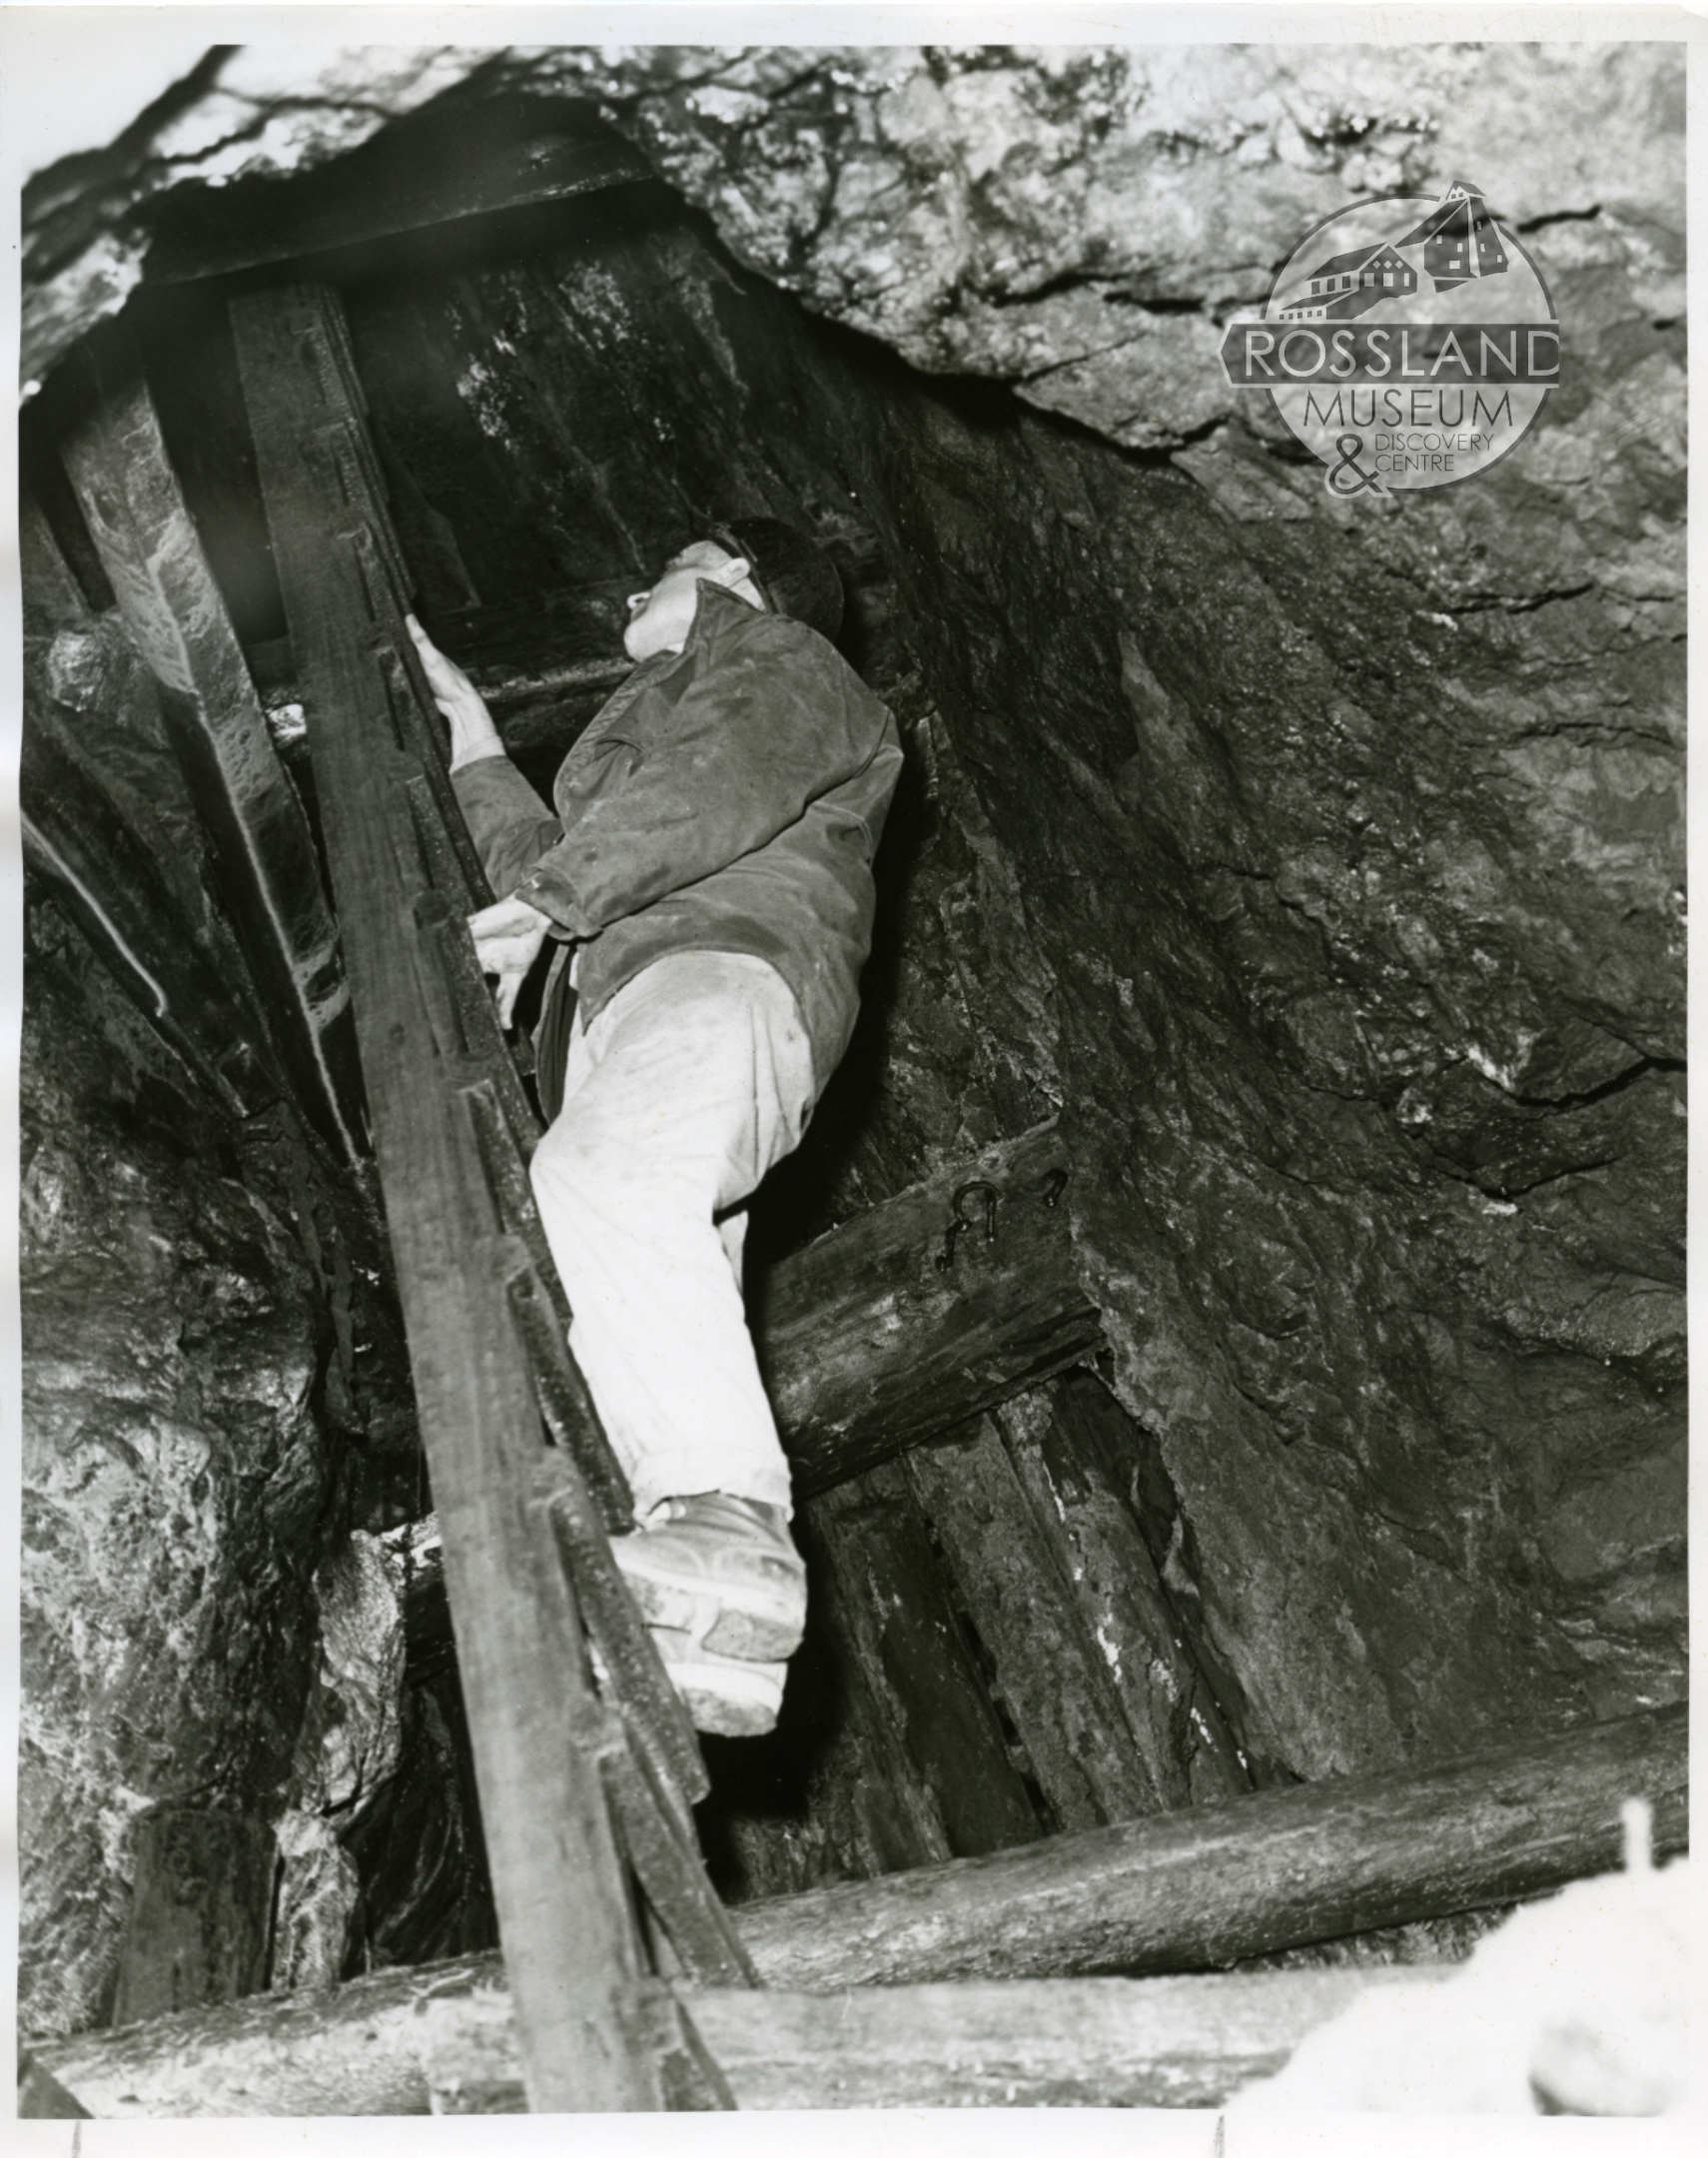 Photo 2276.0280: Roger Terhune looking up the manway in the LeRoi Mine, 1967